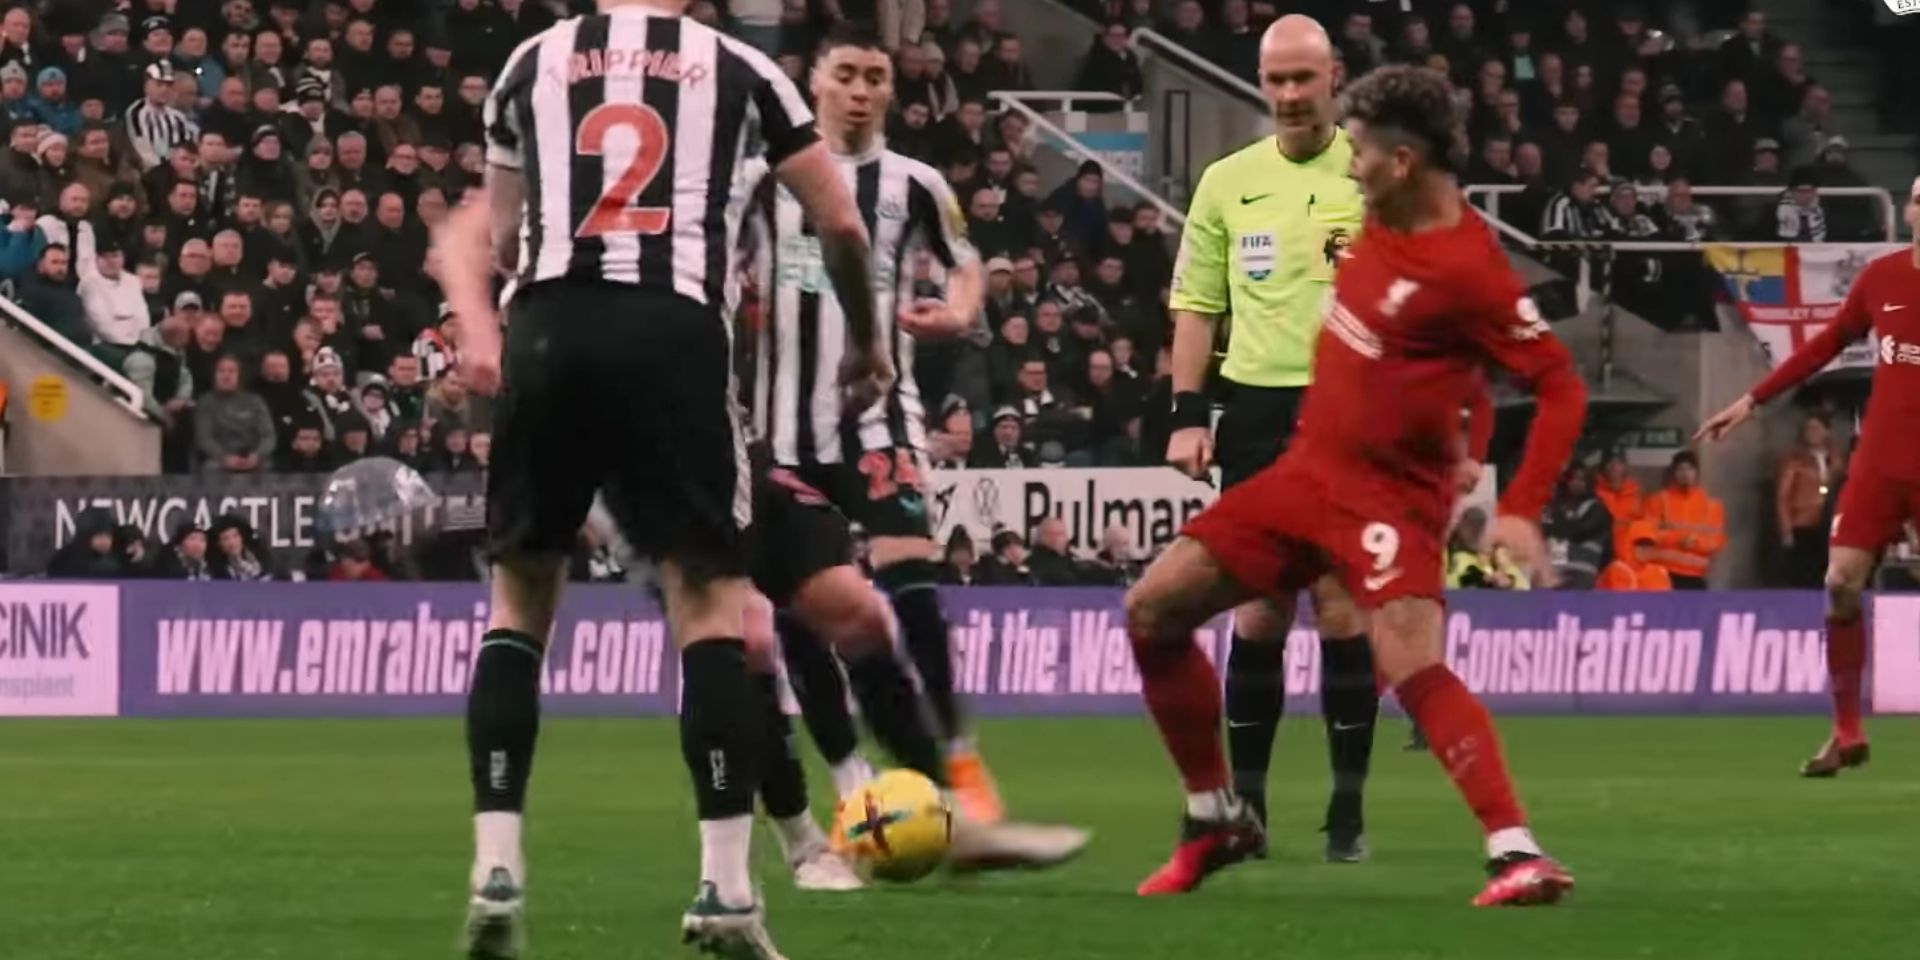 (Video) New angle of Firmino’s samba skills as he dances past Newcastle players with ease